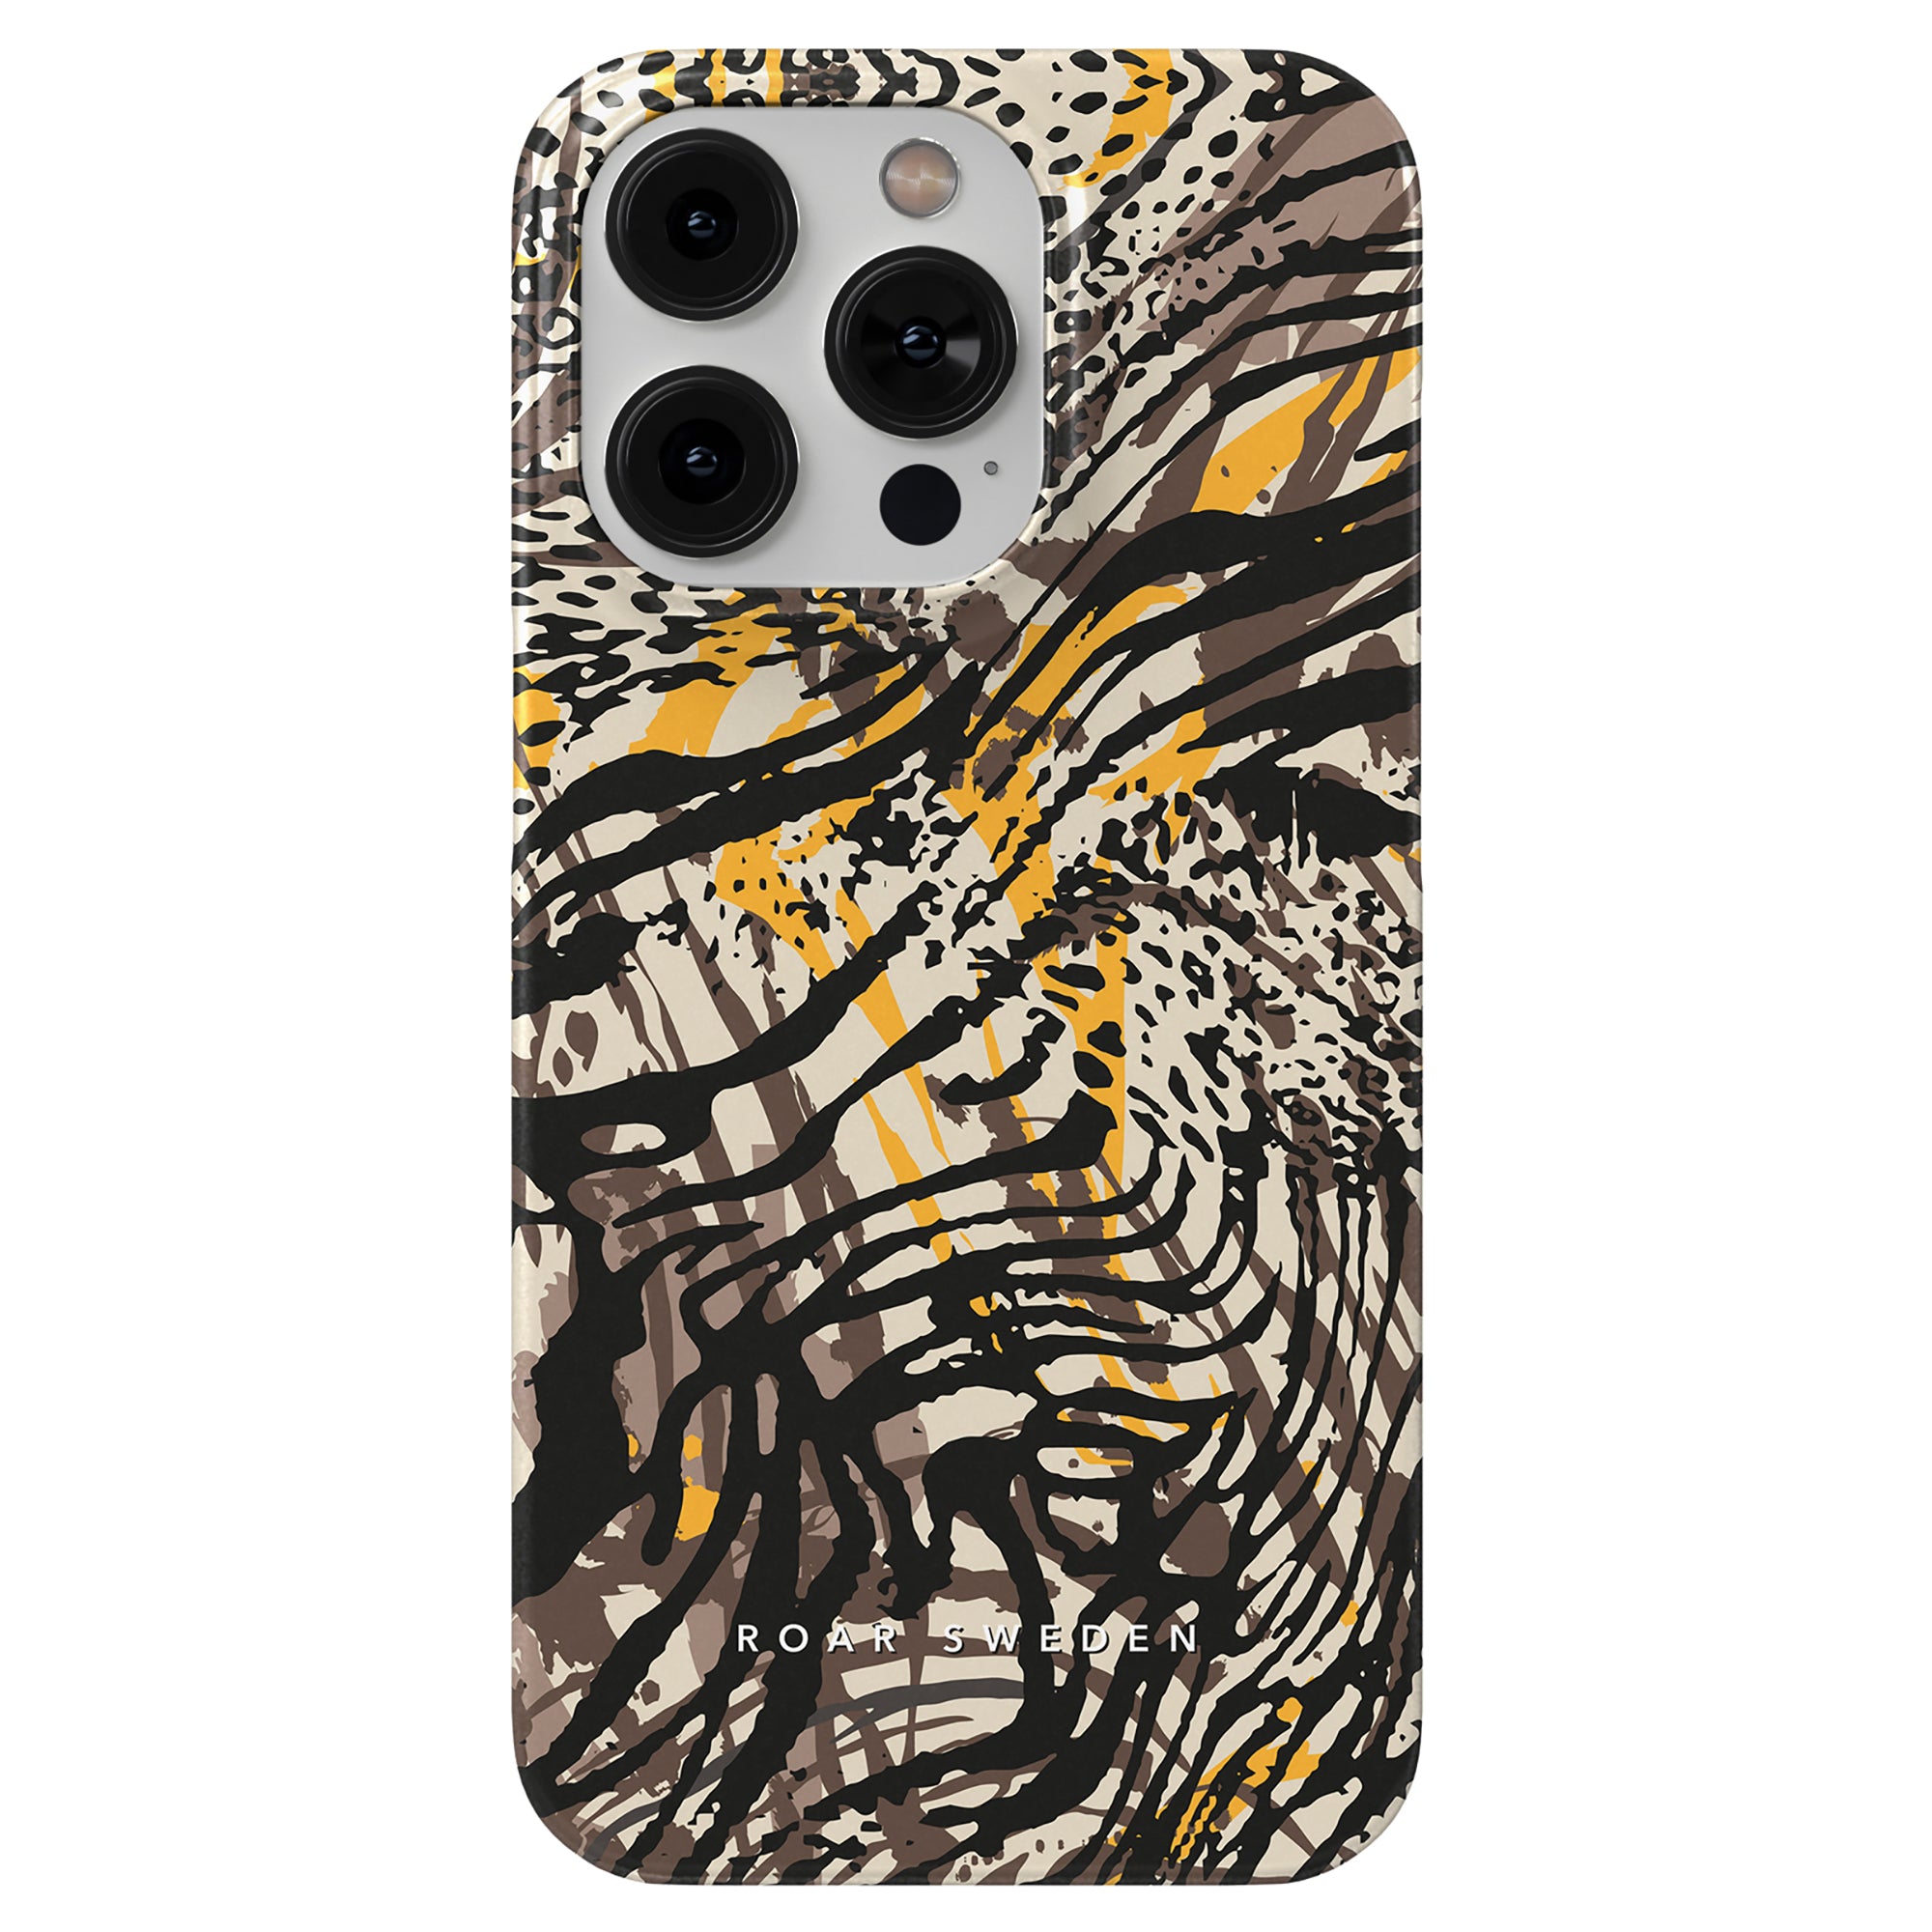 A Savage - Slim case with an explosive black and yellow pattern.